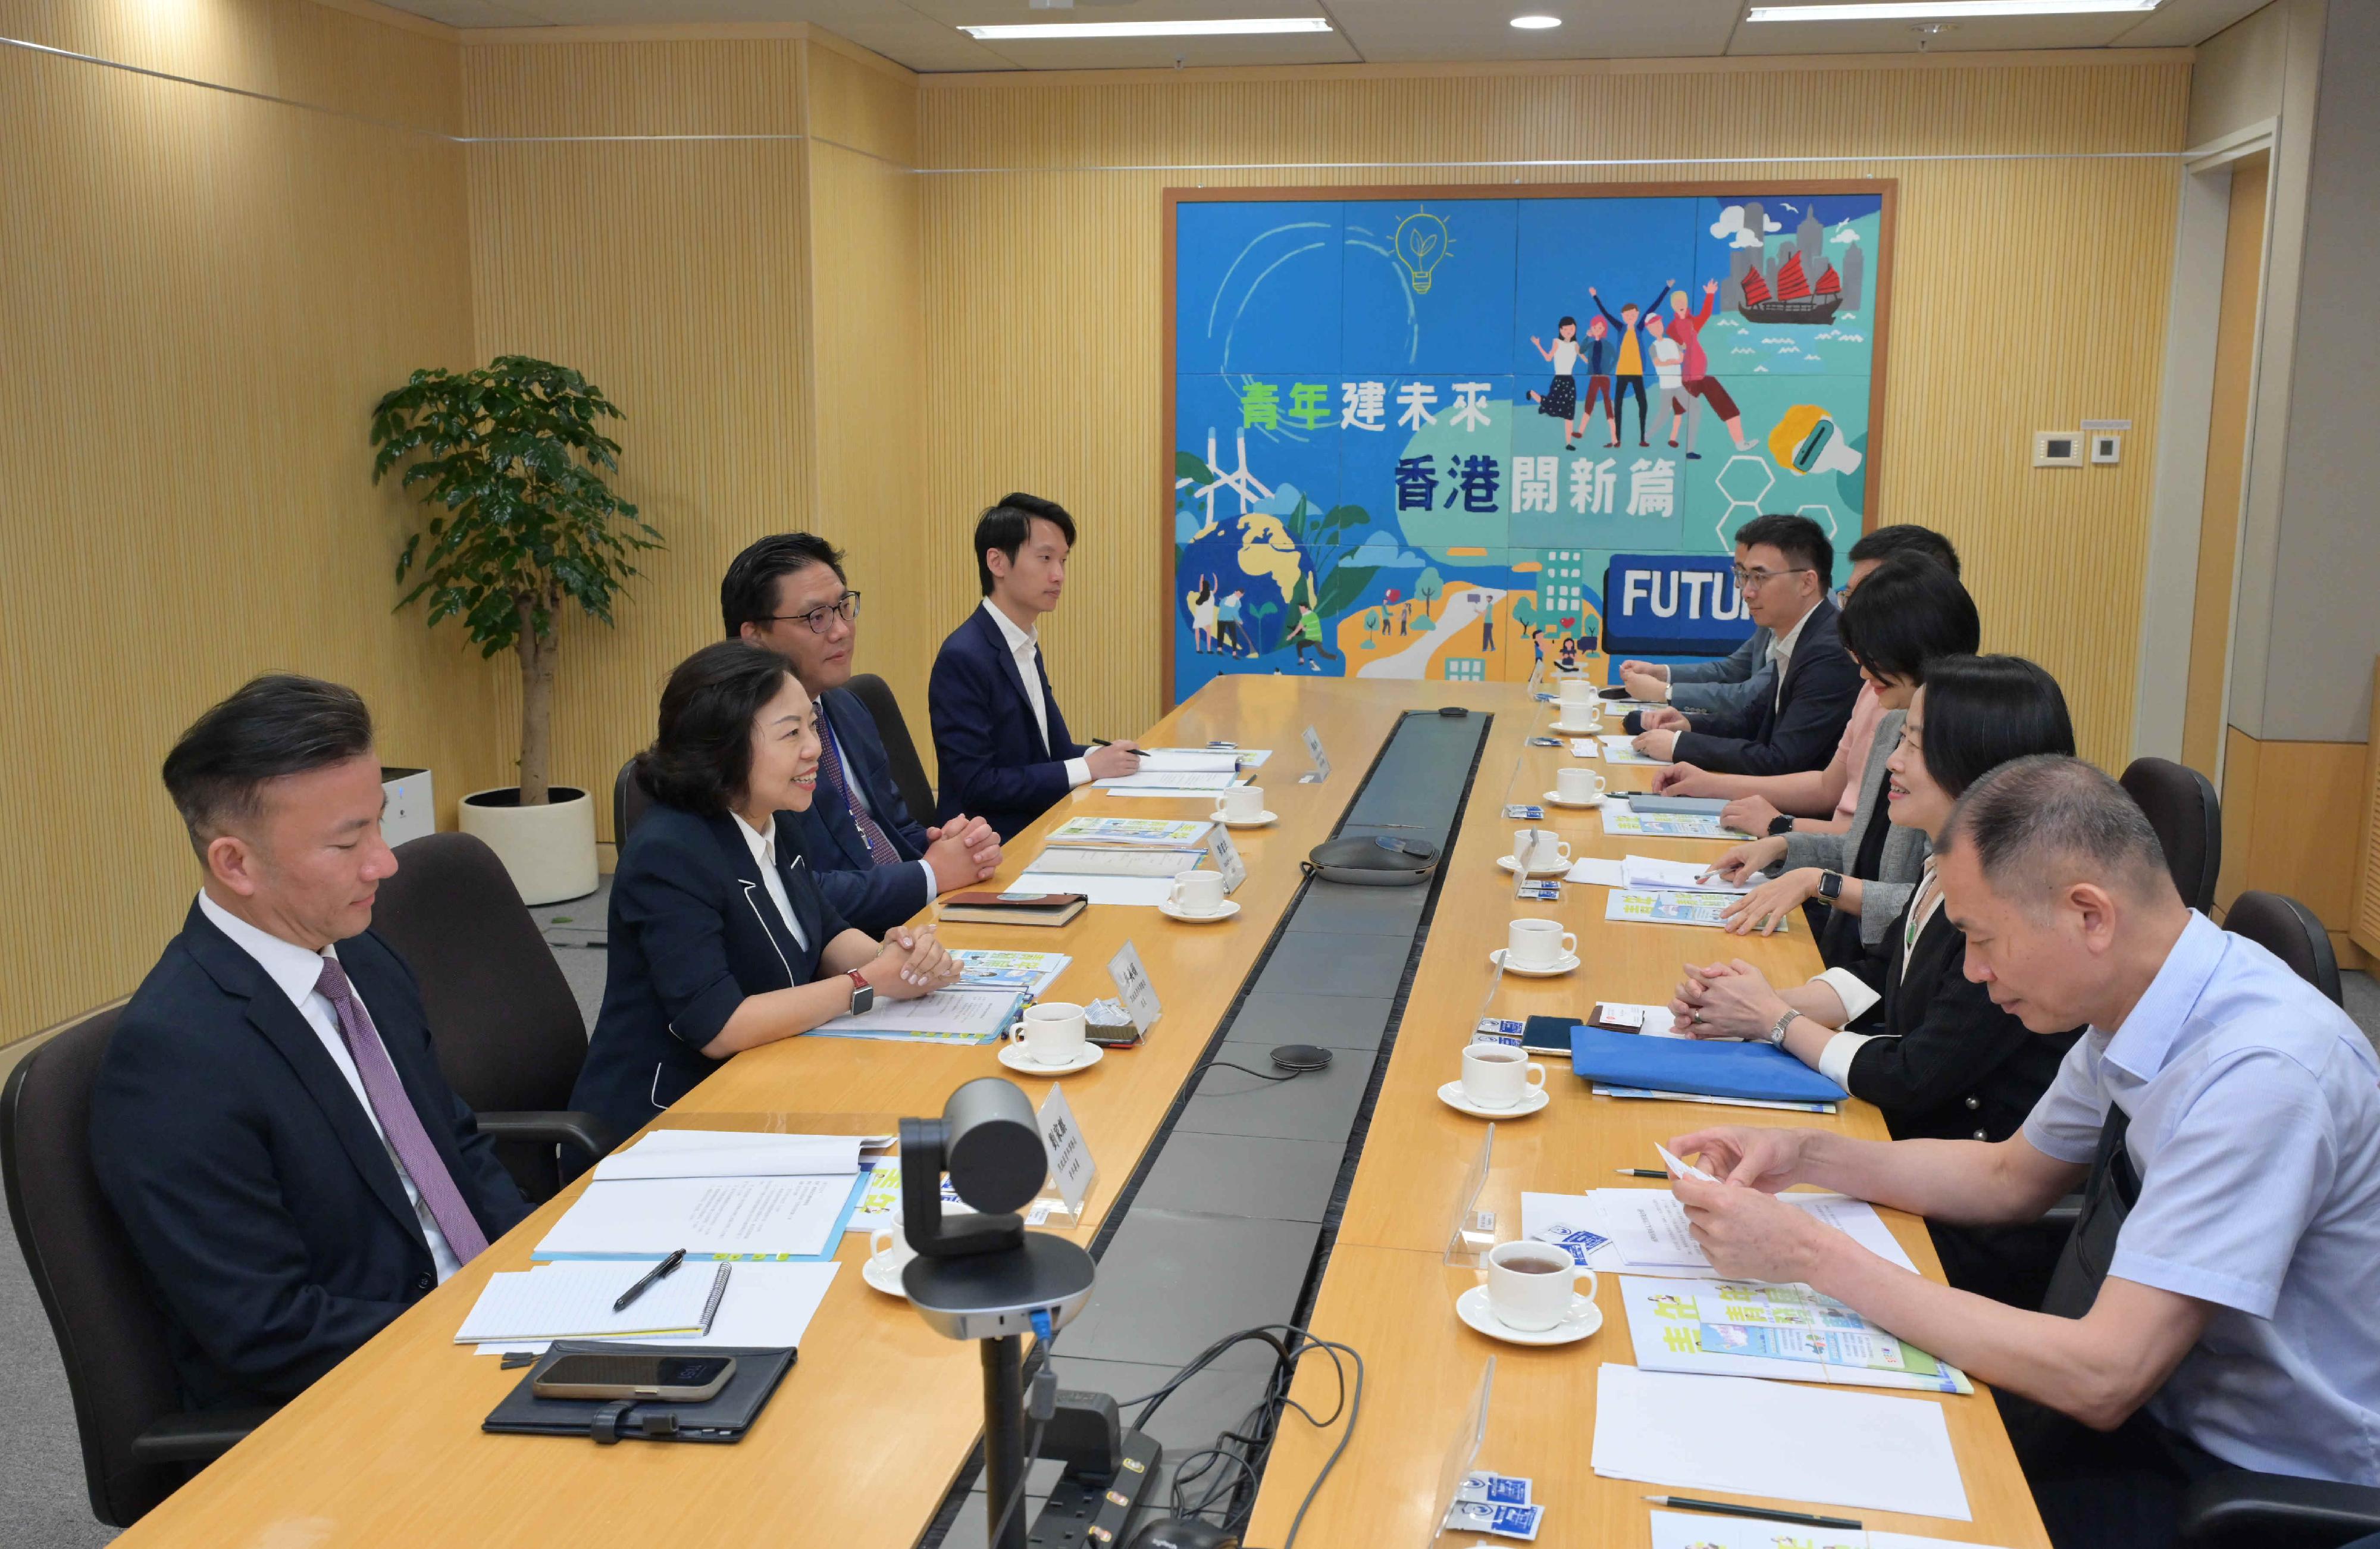 The Secretary for Home and Youth Affairs, Miss Alice Mak (second left), today (May 22) met with a delegation led by Deputy District Mayor of Nansha District of Guangzhou Municipality Ms Liu Xiaotung (second right) to exchange views on promoting Hong Kong's youth integration into the country's overall development and youth exchanges between the Mainland and Hong Kong. The Under Secretary for Home and Youth Affairs, Mr Clarence Leung (third left), and the Commissioner for Youth, Mr Wallace Lau (first left), also join the meeting.